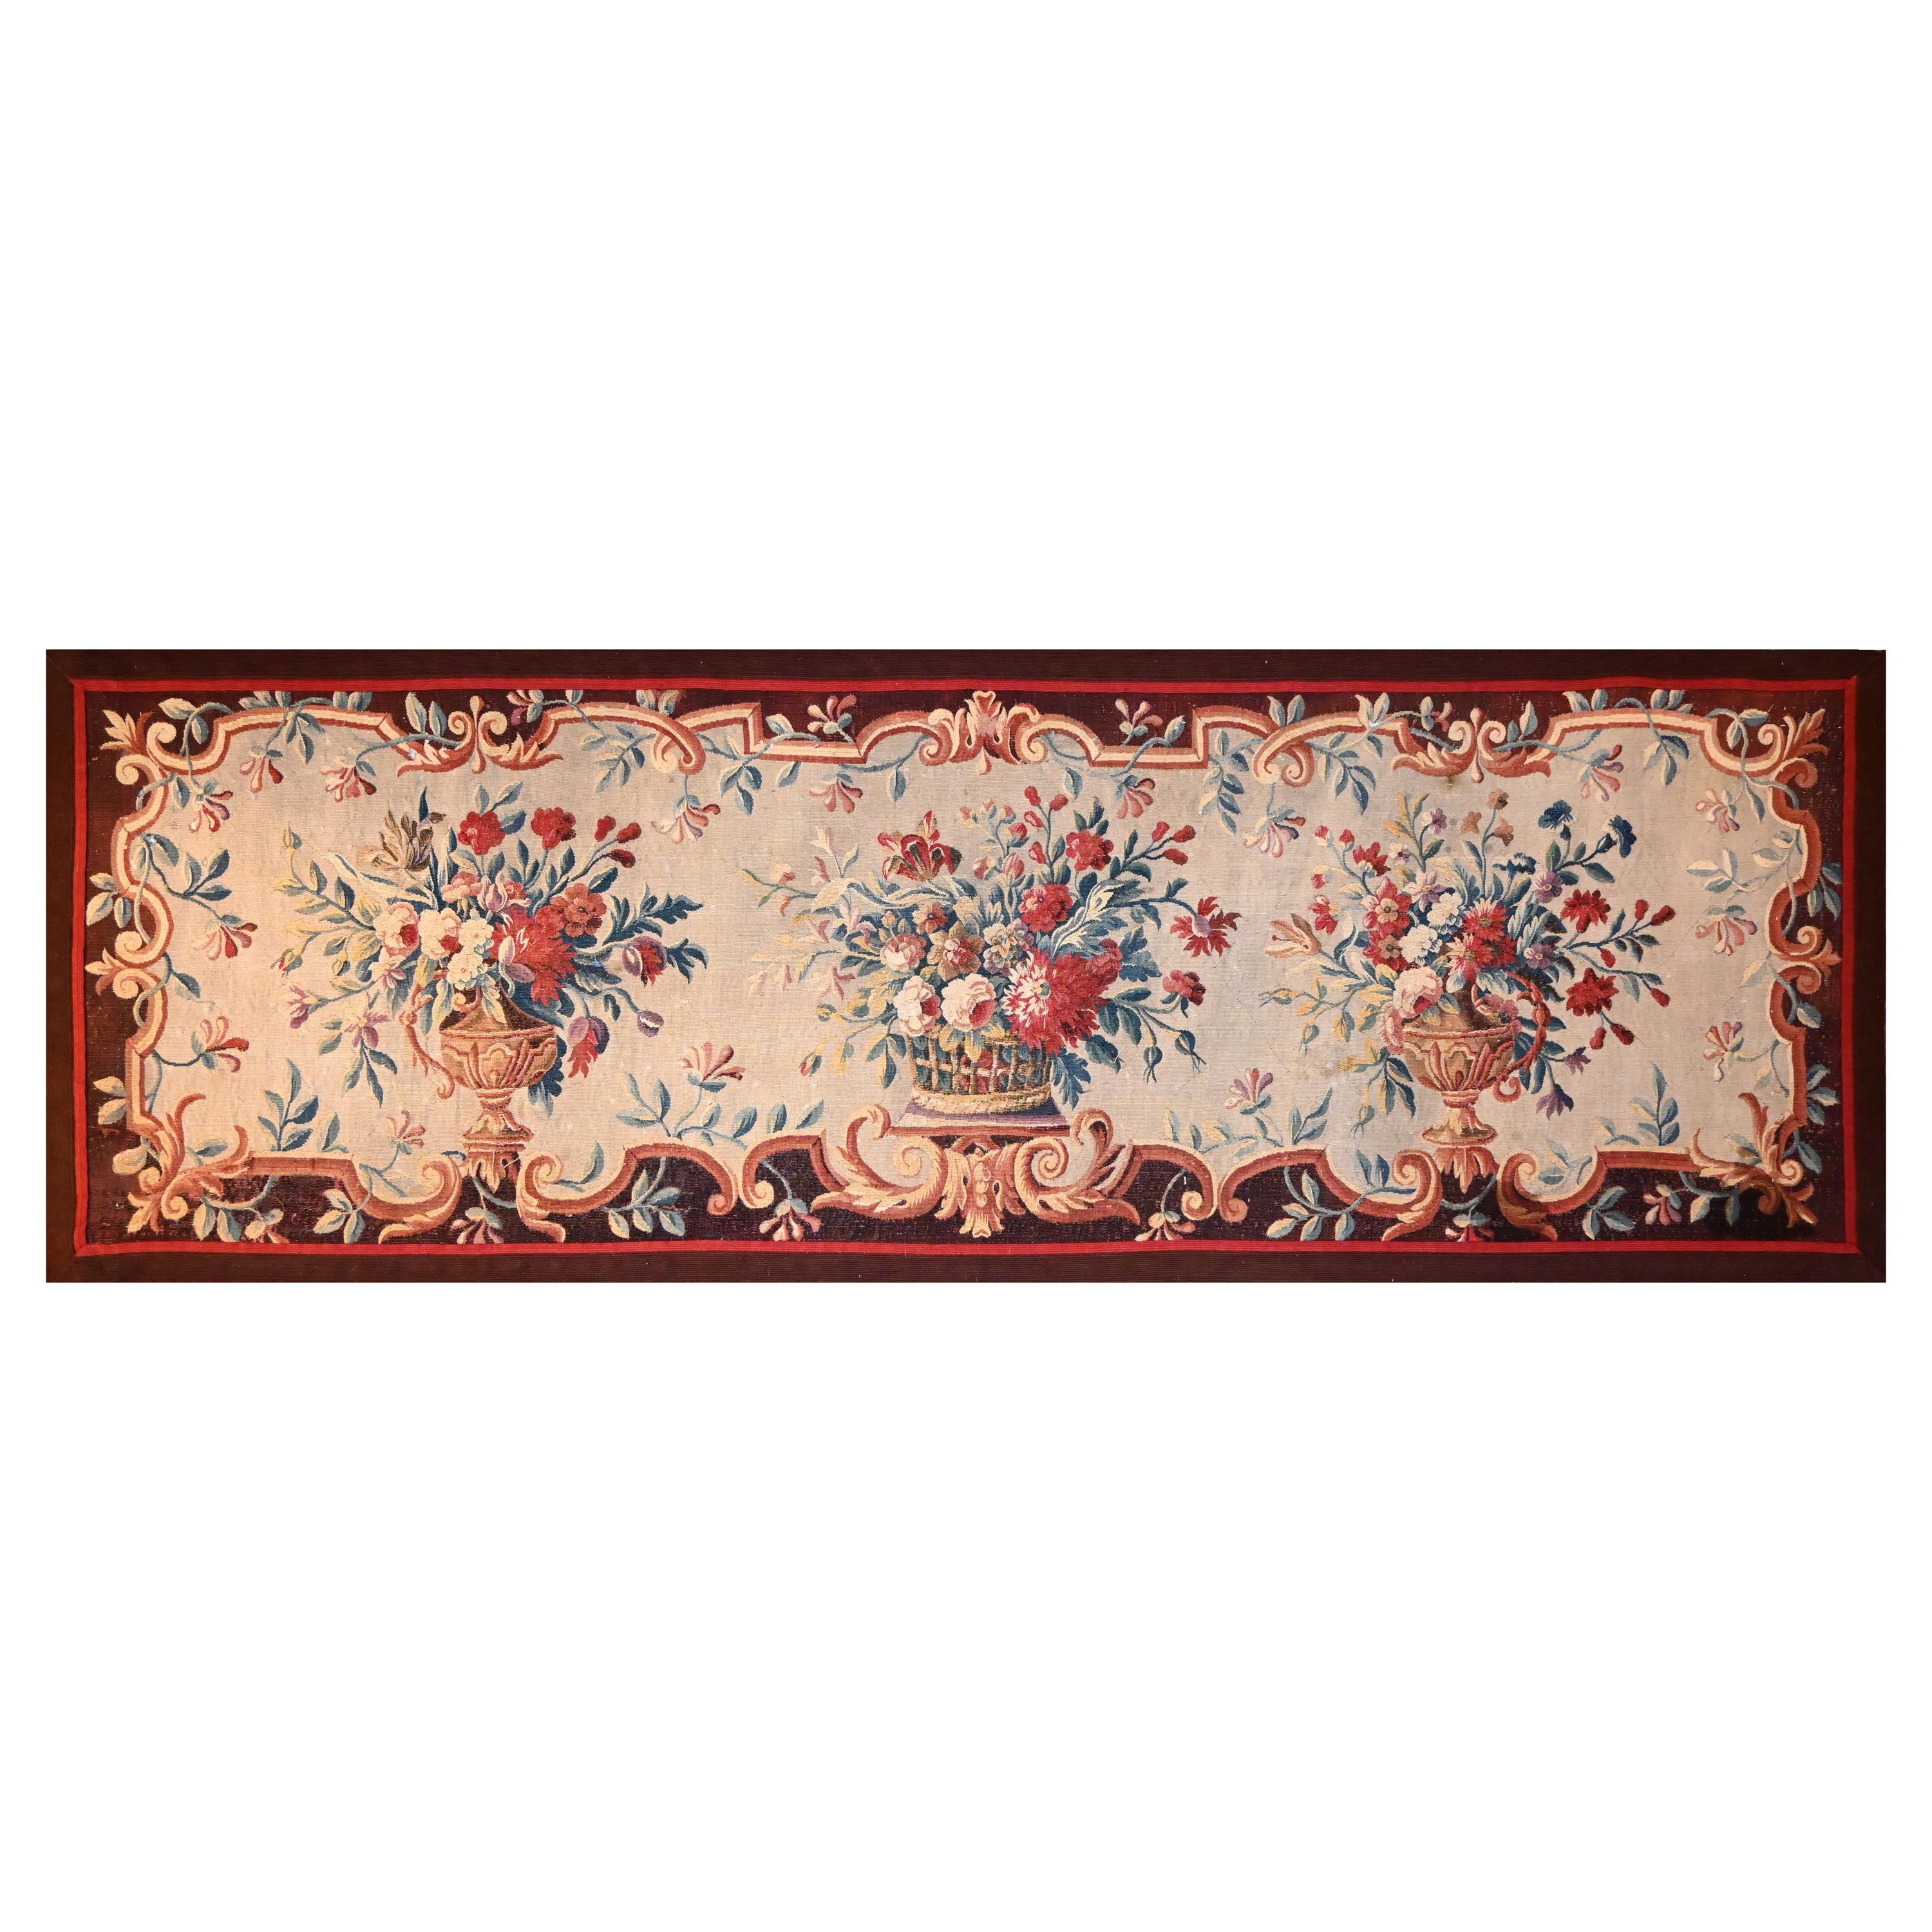 Floral Brussels Tapestry 18th Century - L 185 x H 85 cm - N° 1360 For Sale